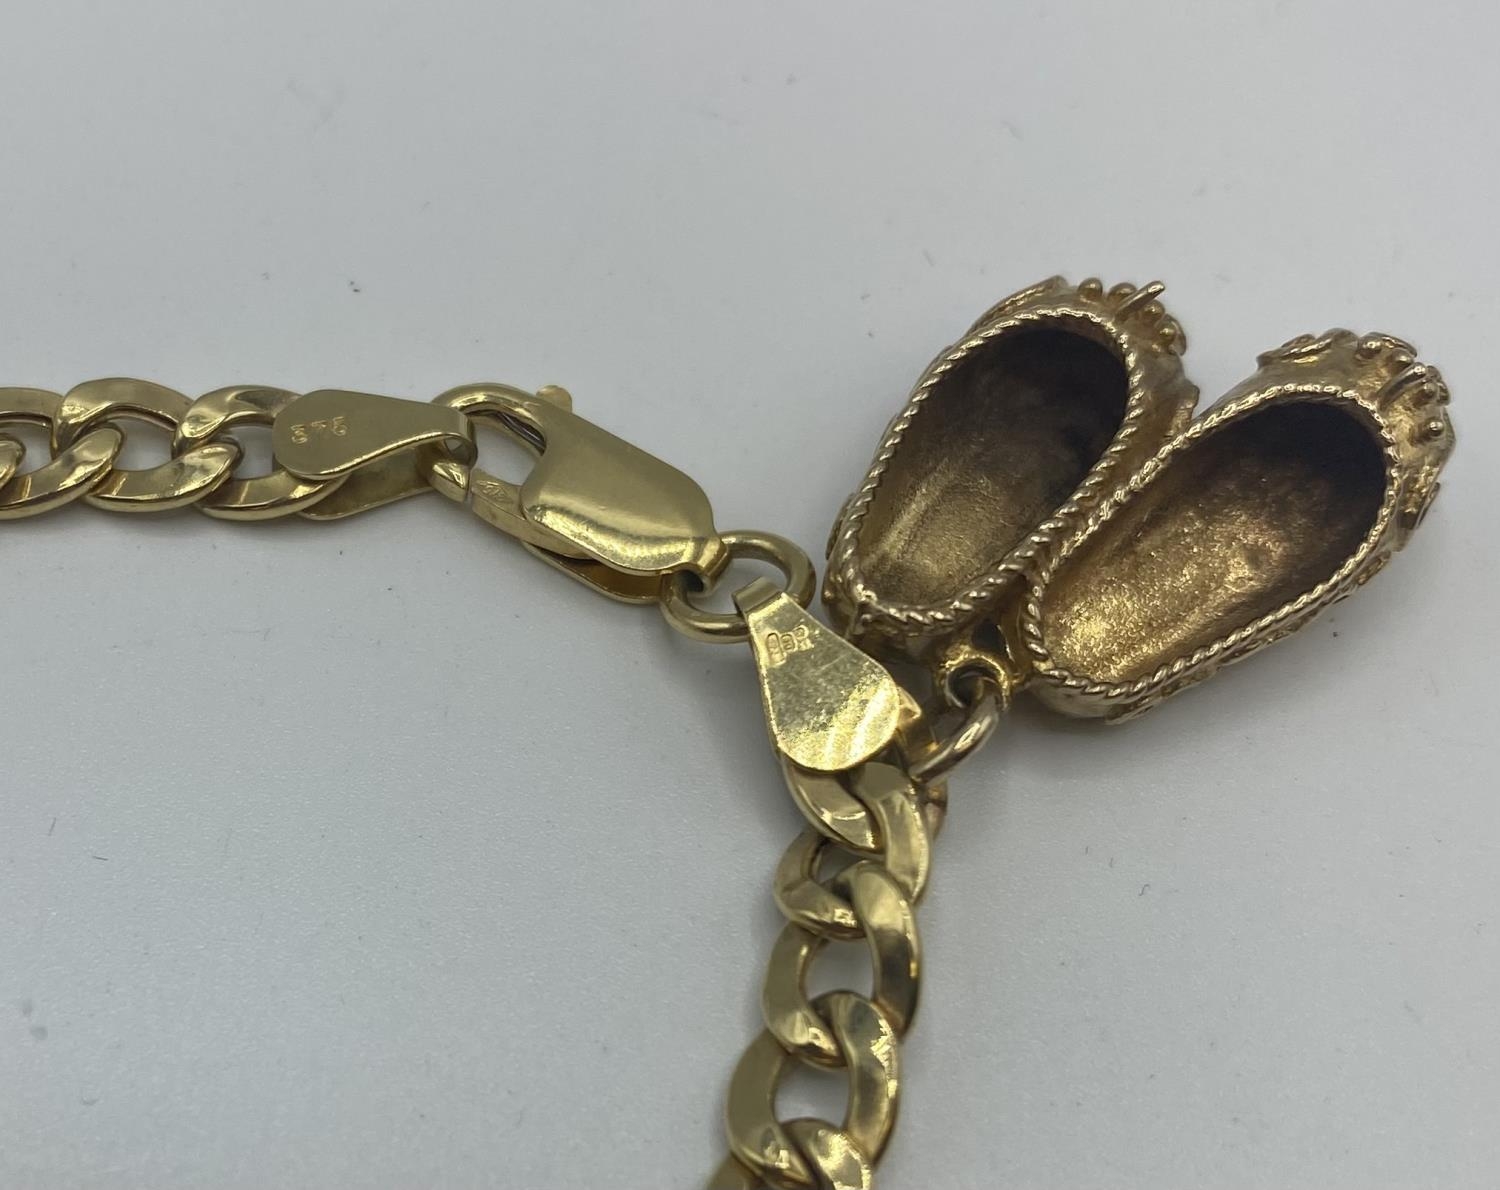 A 9ct gold bracelet and slipper charm 9.5g - Image 2 of 3